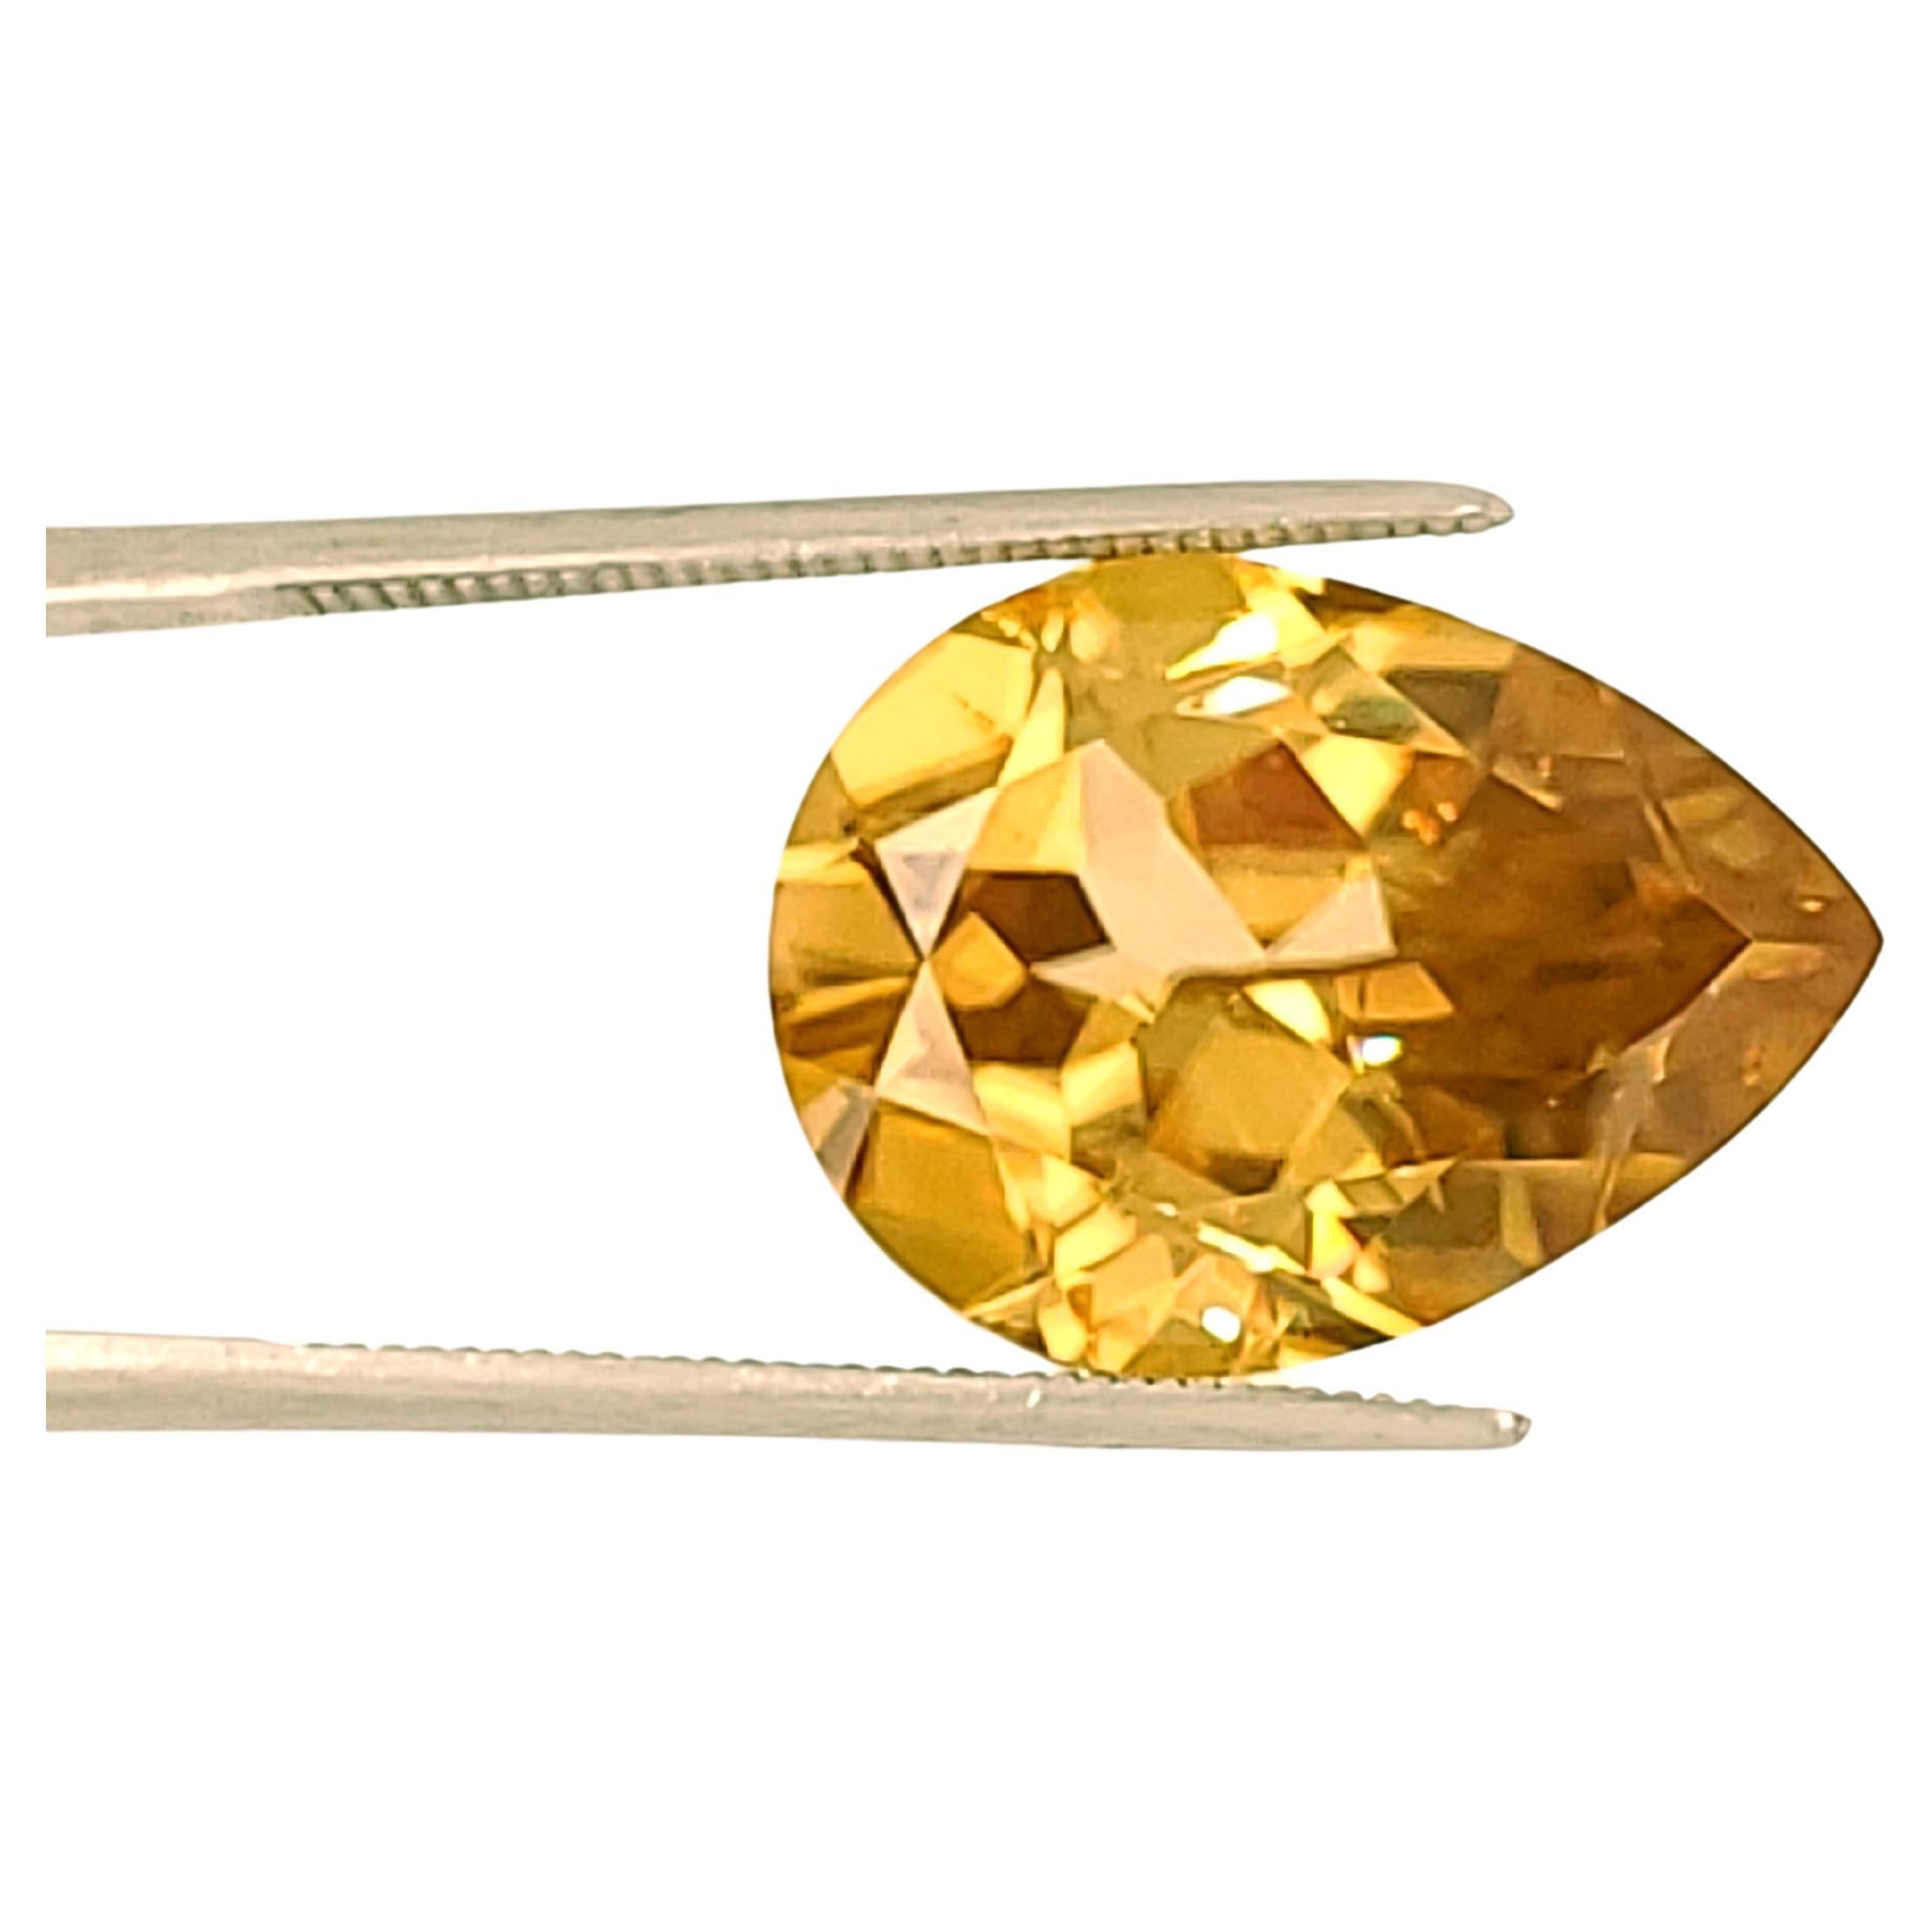 10.97ct Bright Yellow/Gold Pear Shaped Natural Zircon - U.S. Faceted